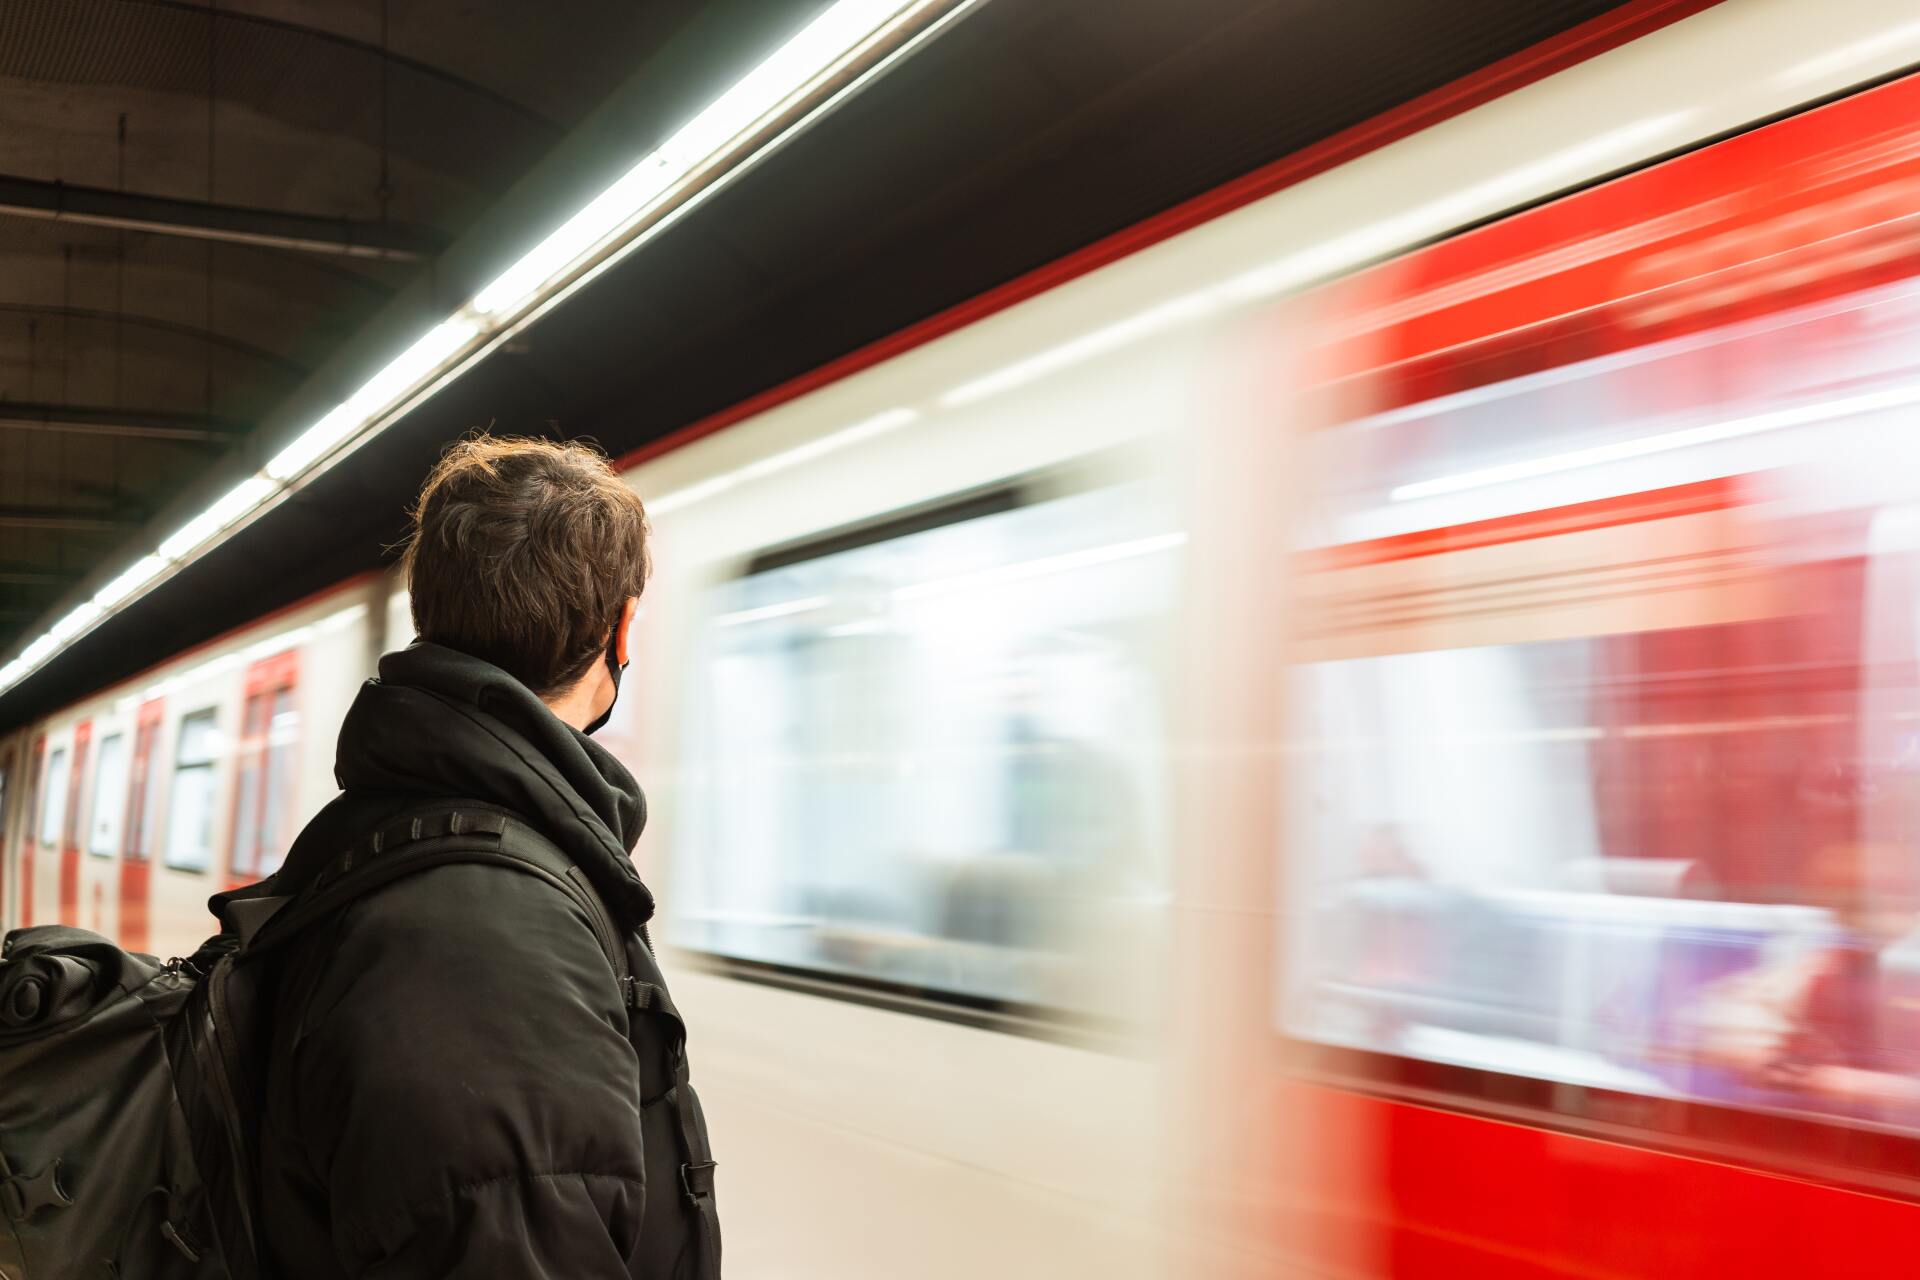 Image from behind of man wearing a mask at subway platform as a subway goes by in motion blur